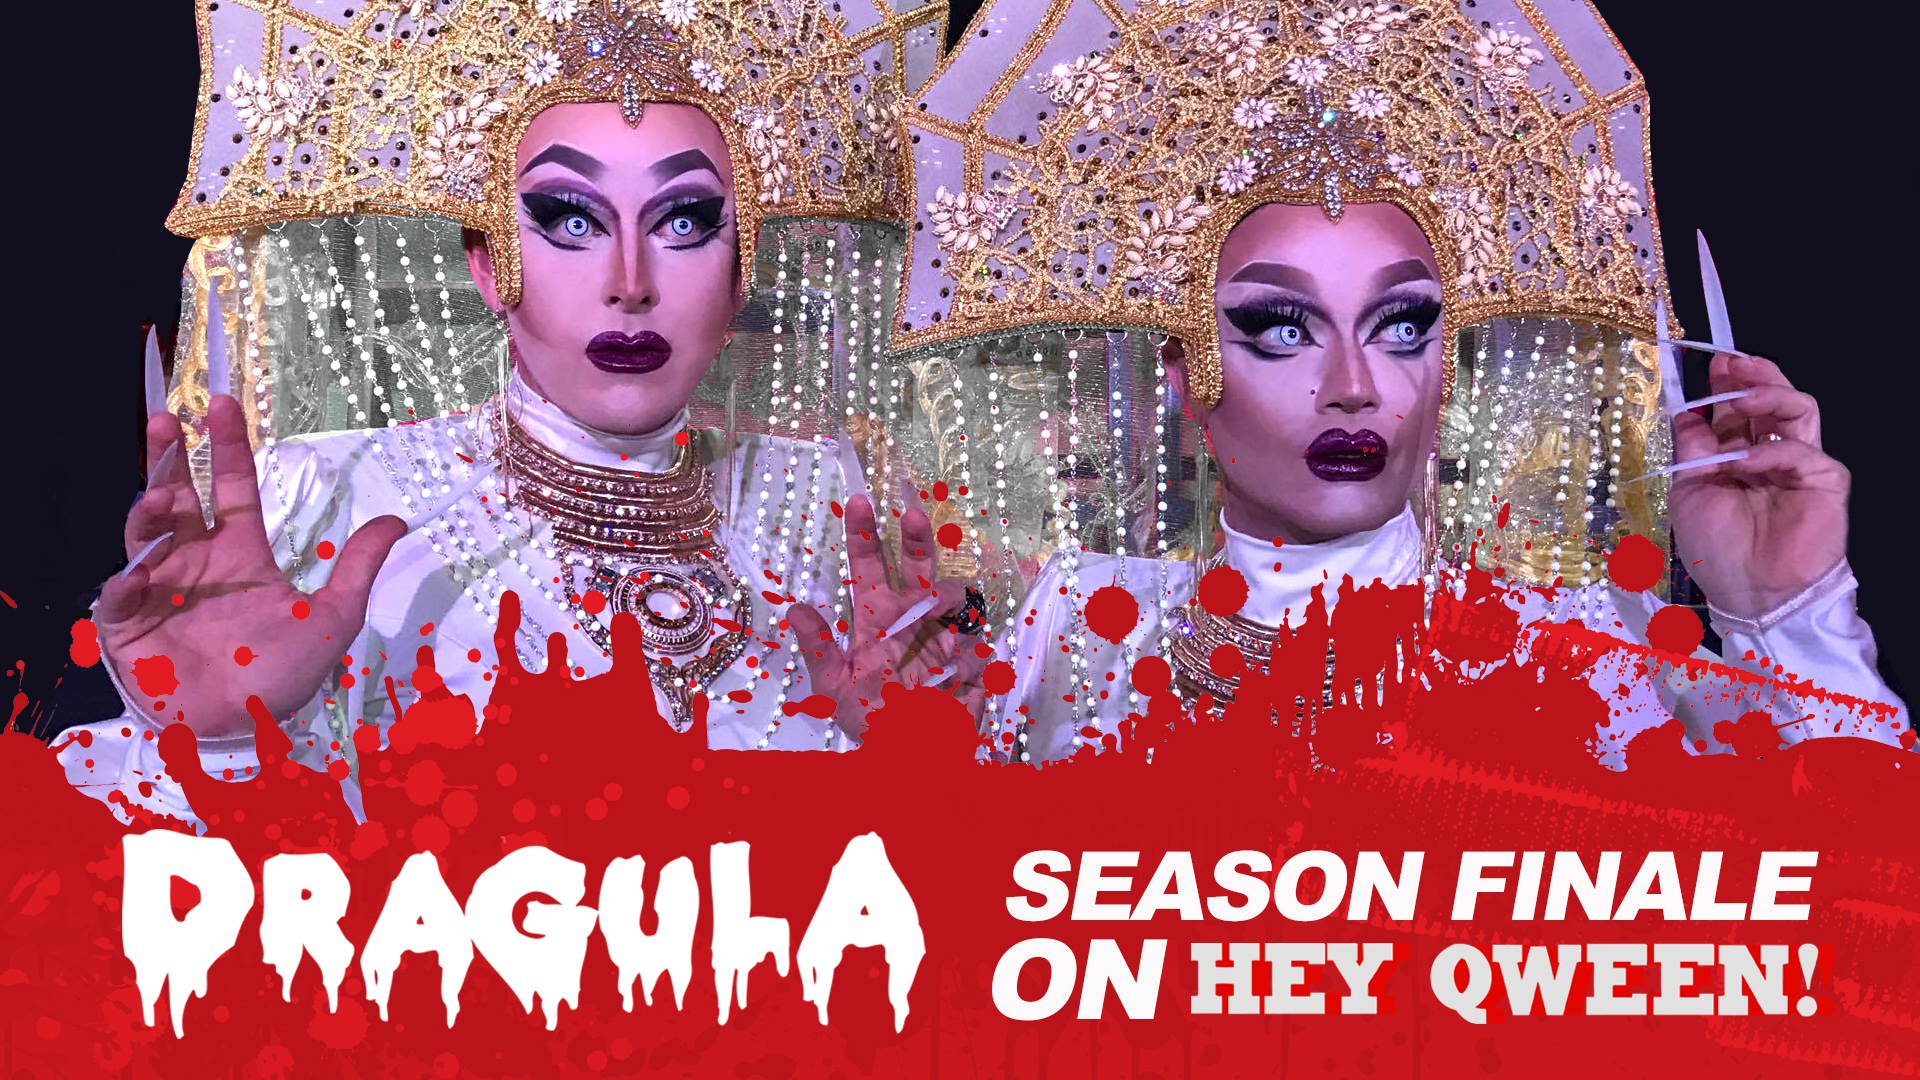 dragula boulet brothers finale season drag hey qween episode